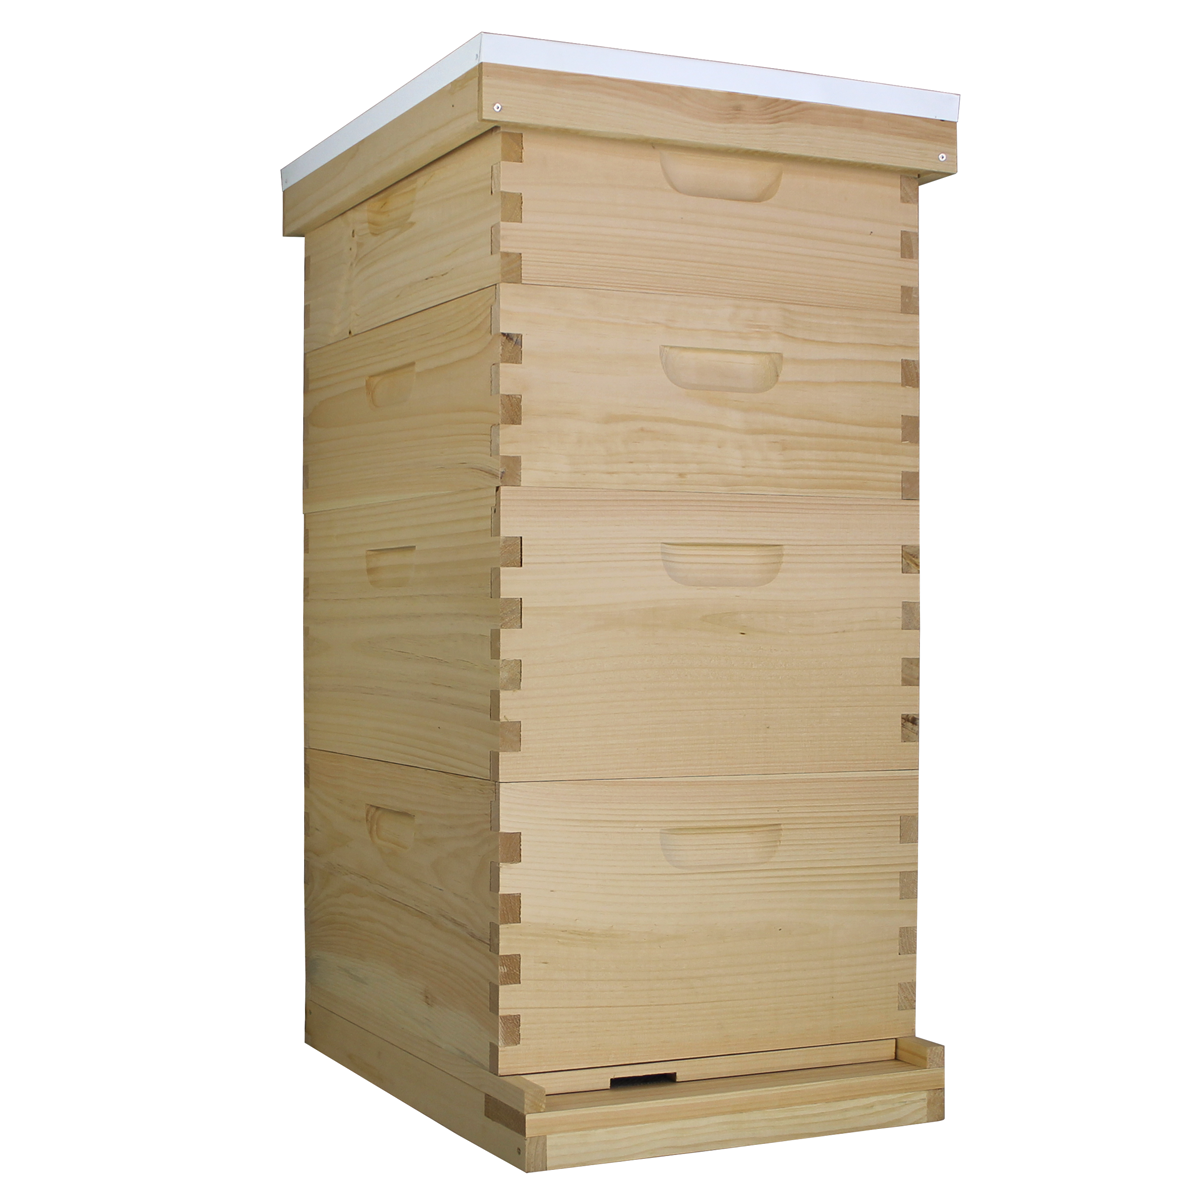 Busy Bees 'N' More Amish Made 10 Frame Beehive With 2 Deep Bee Boxes & 2 Medium Bee Boxes